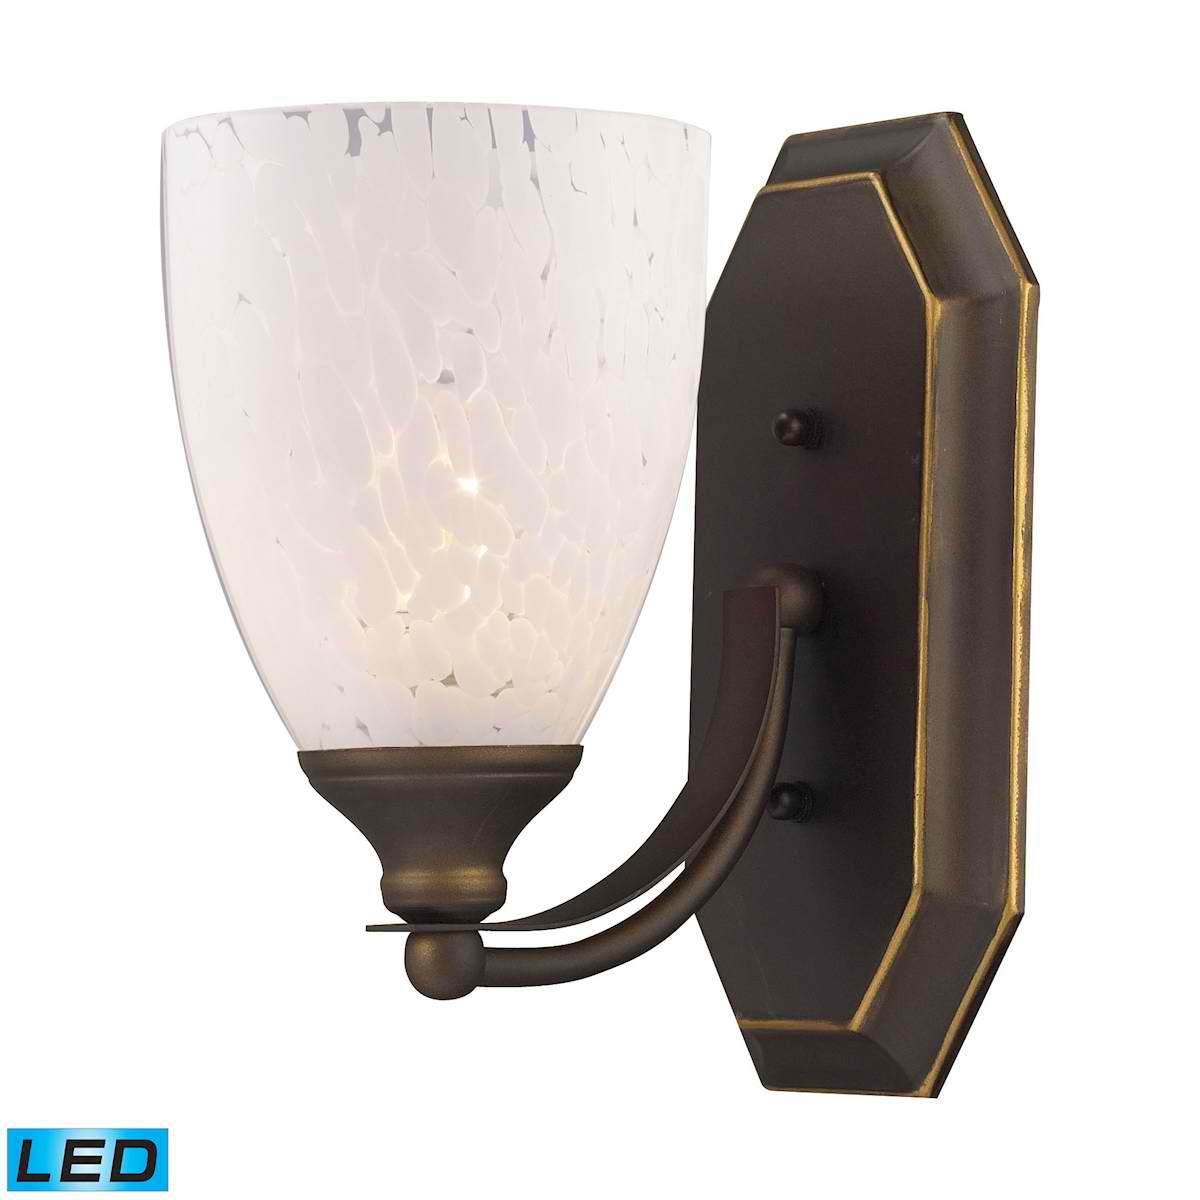 1 Light Vanity in Aged Bronze and Snow White Glass - LED Offering Up To 800 Lumens (60 Watt Equivalent)